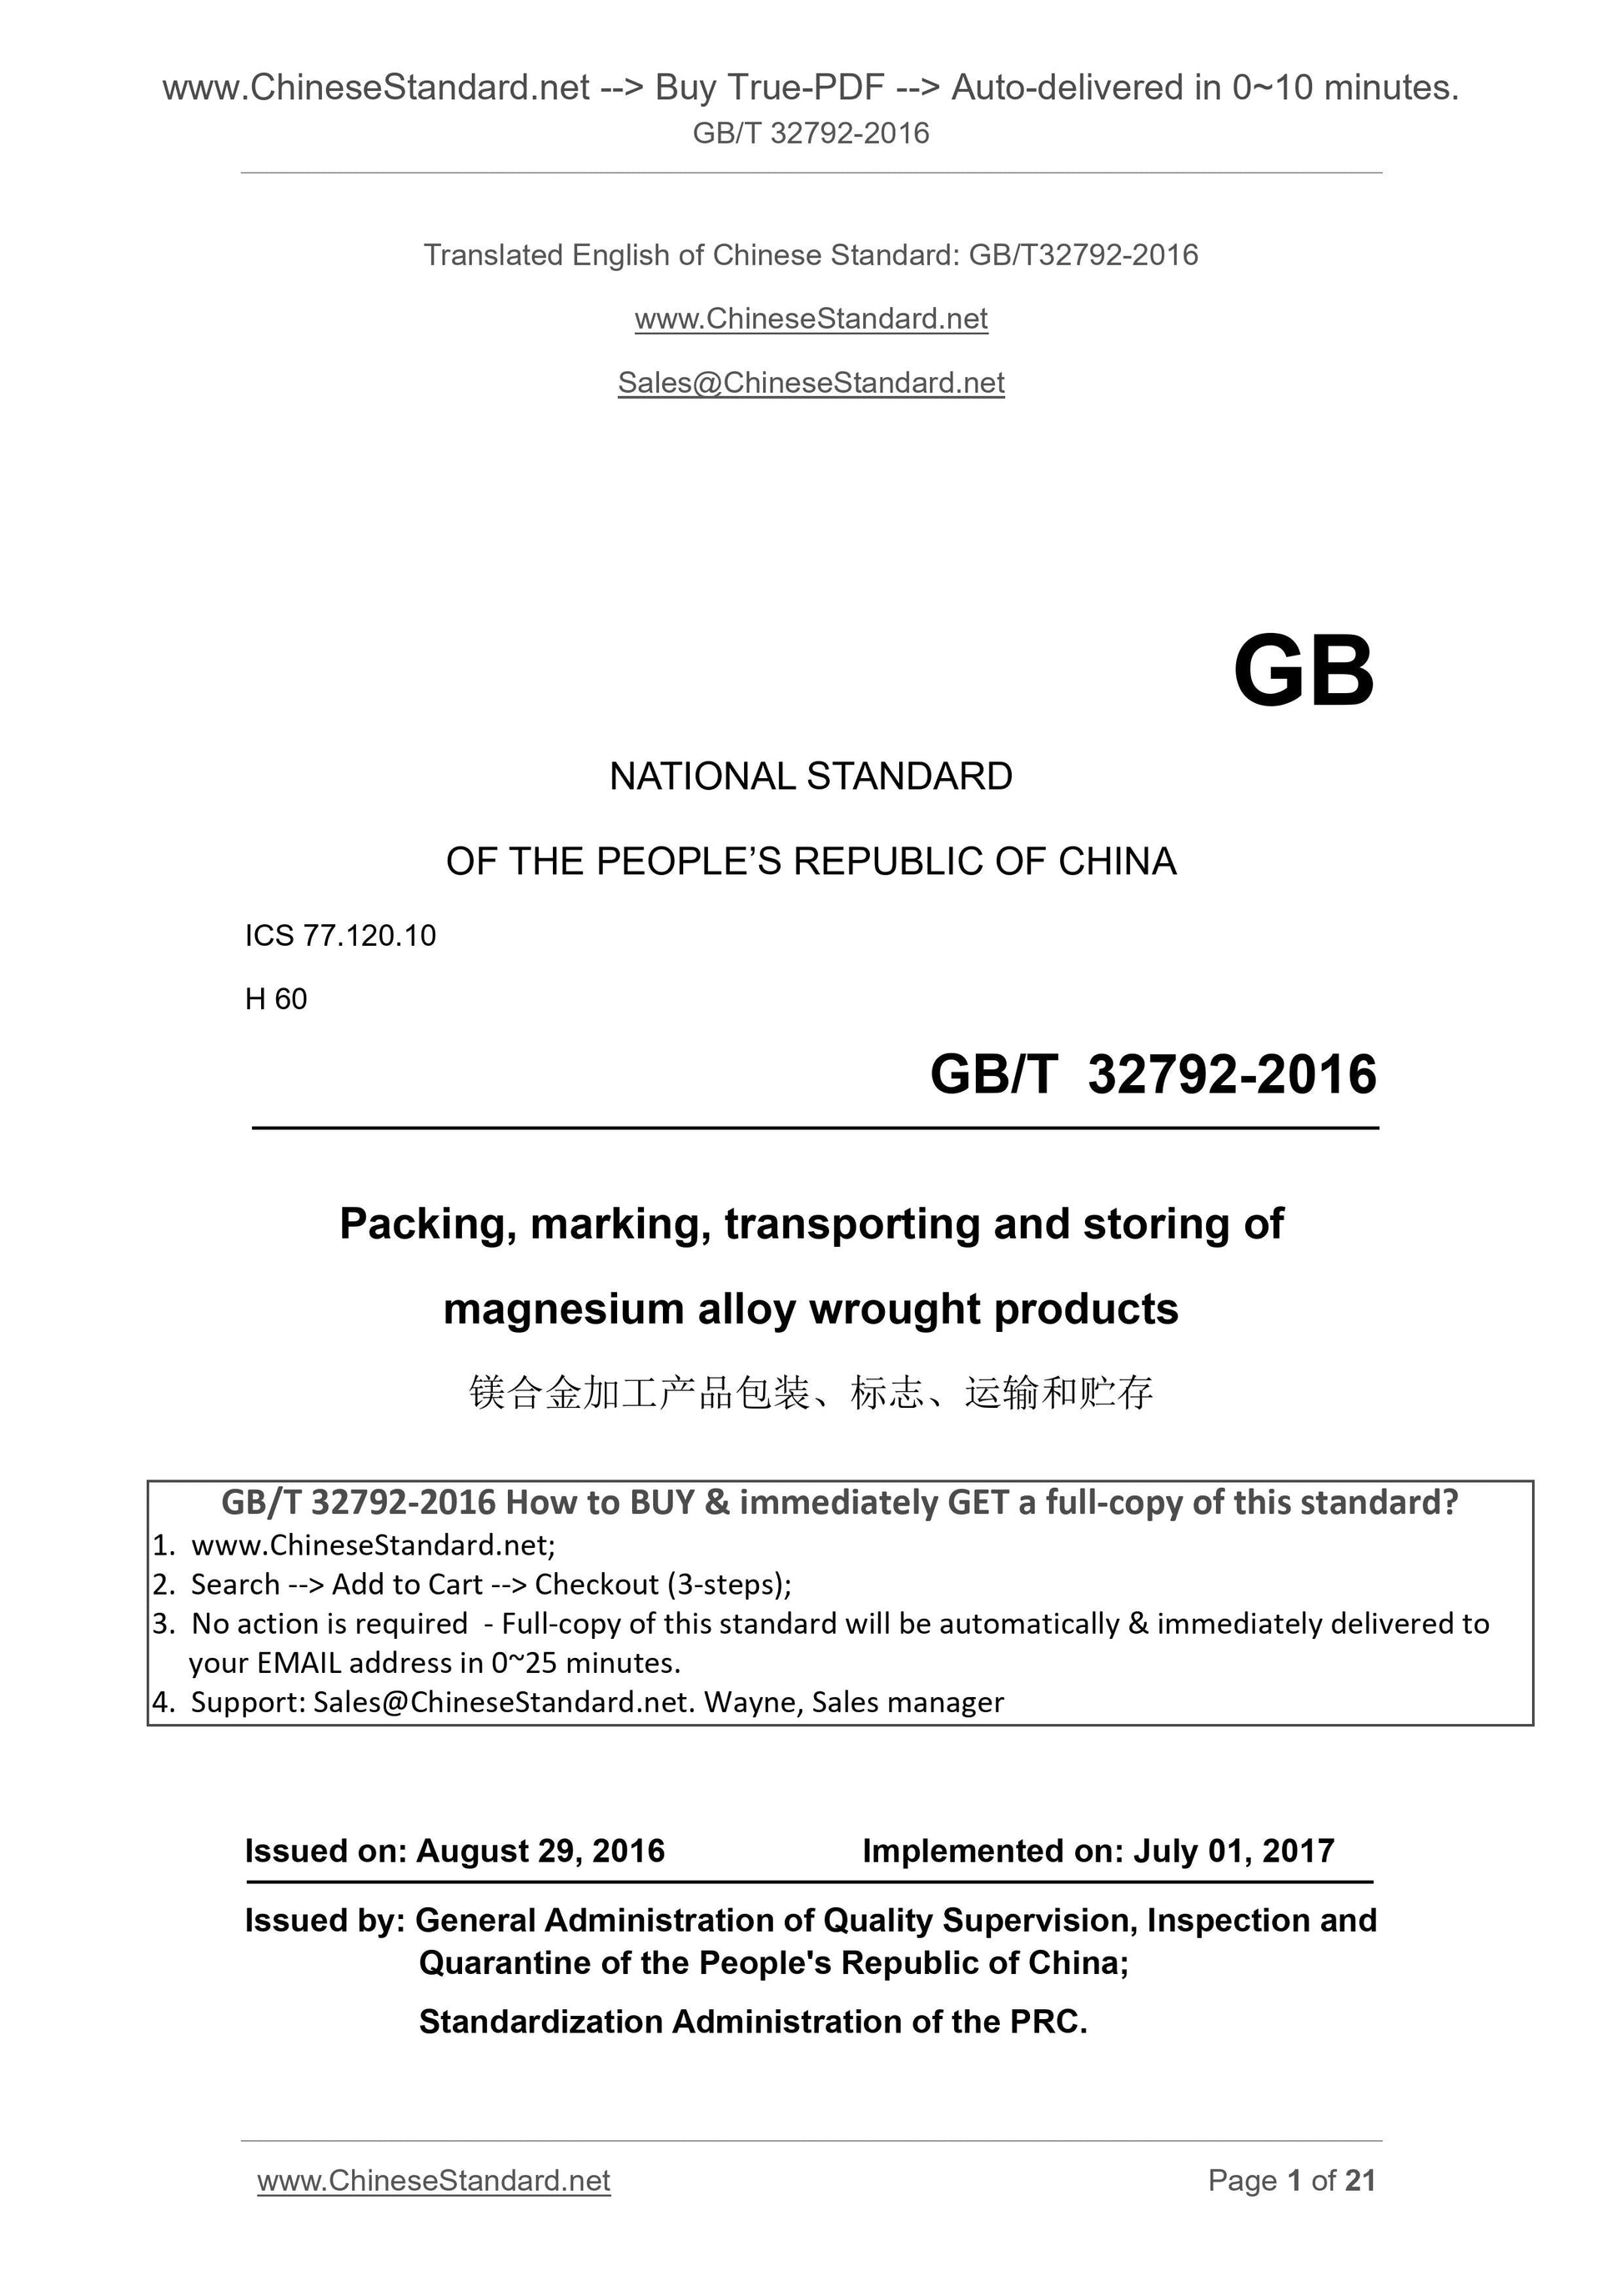 GB/T 32792-2016 Page 1